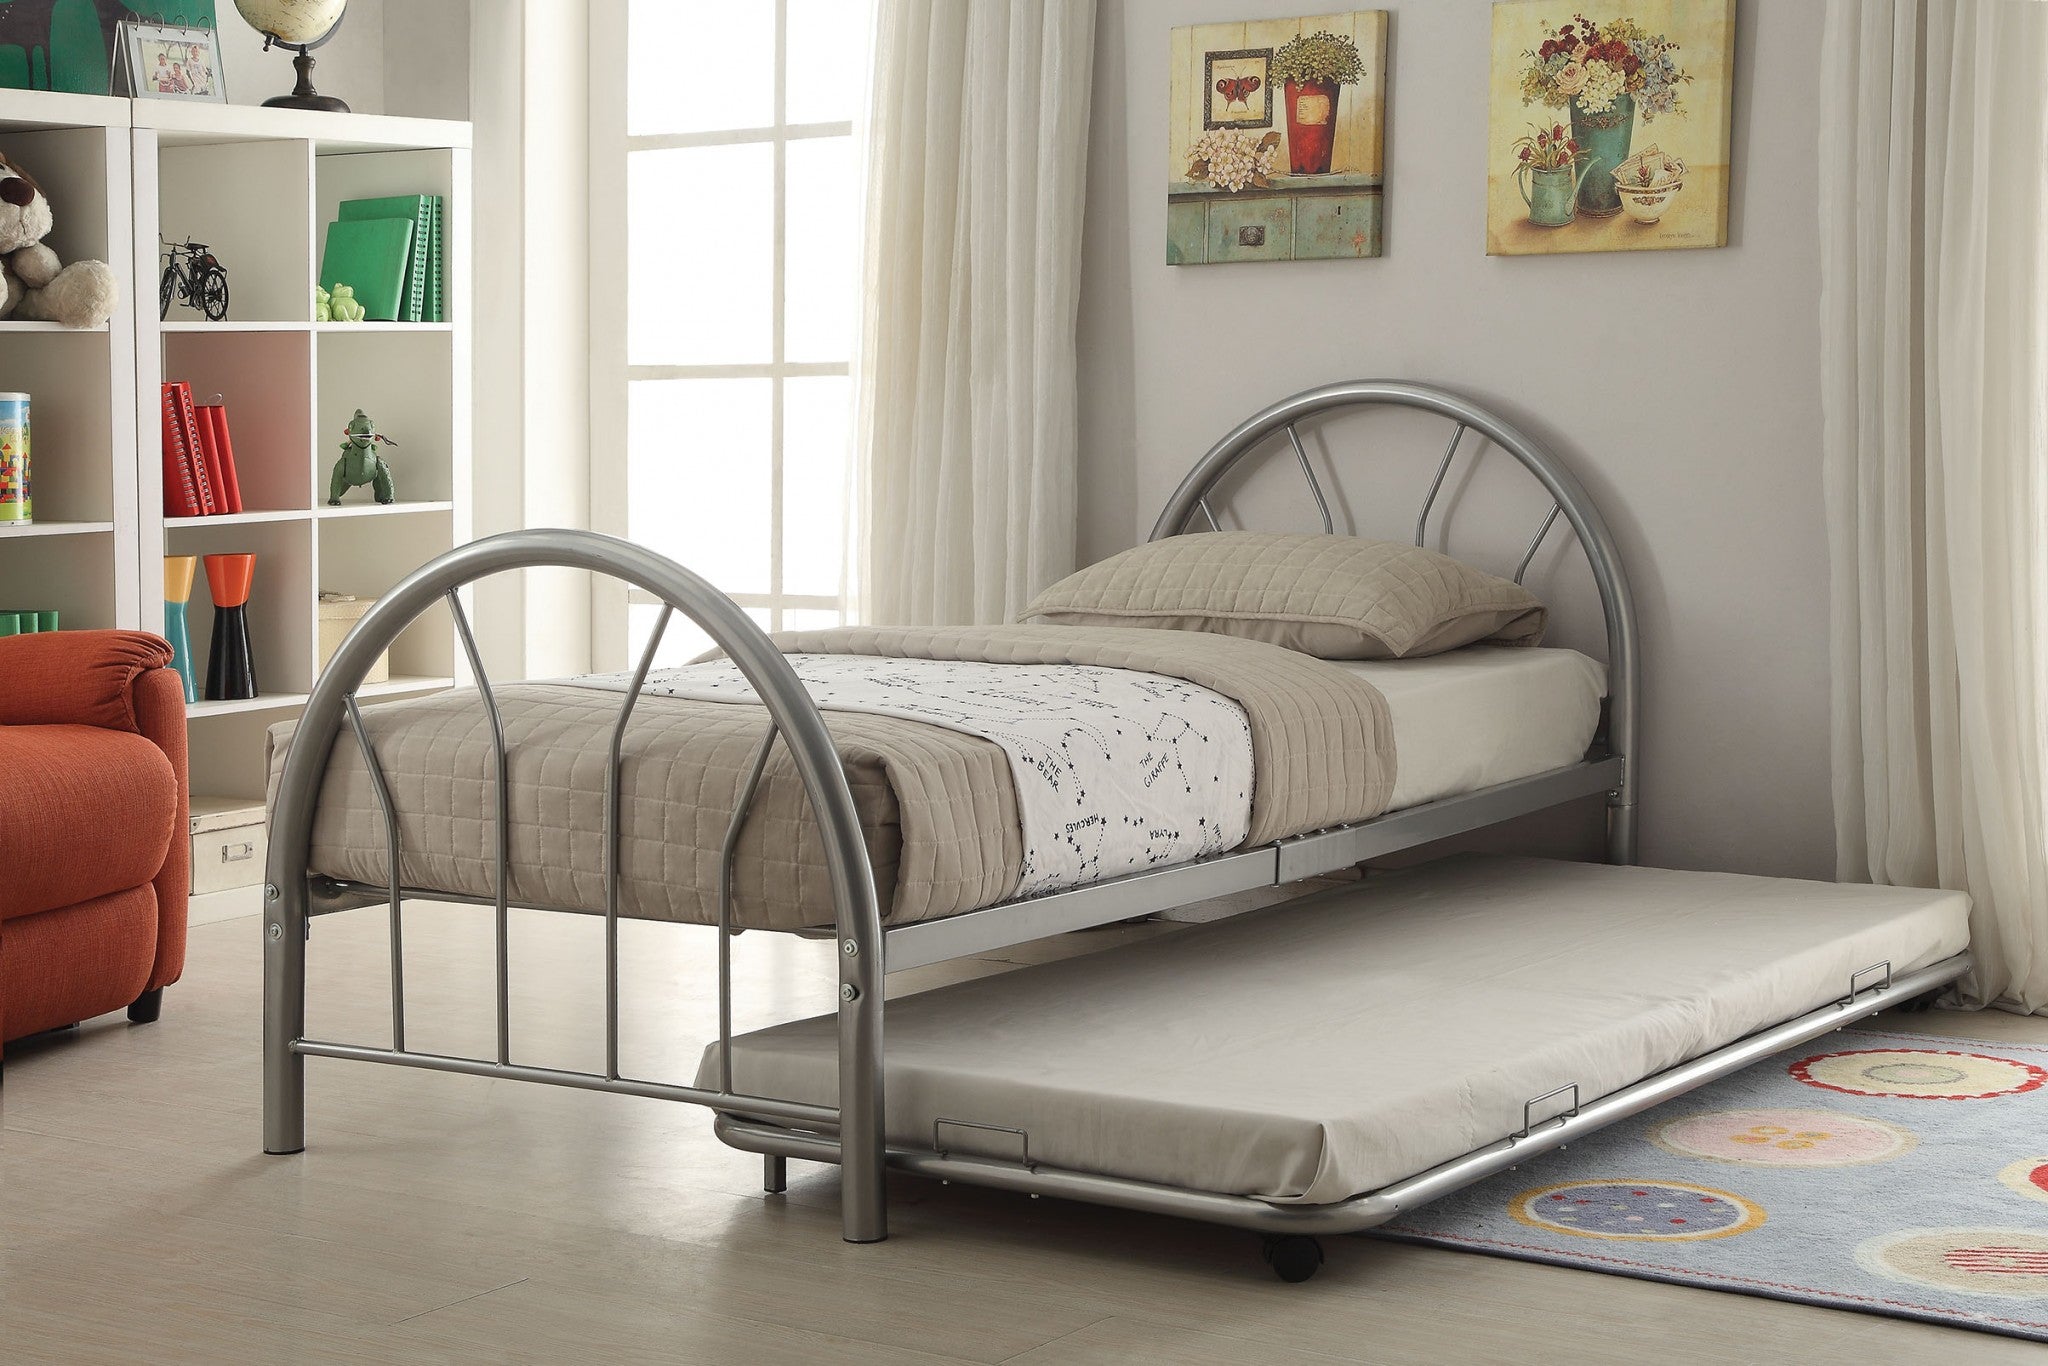 79" X 39" X 33" Twin Silver Silhouette Bed Default Title